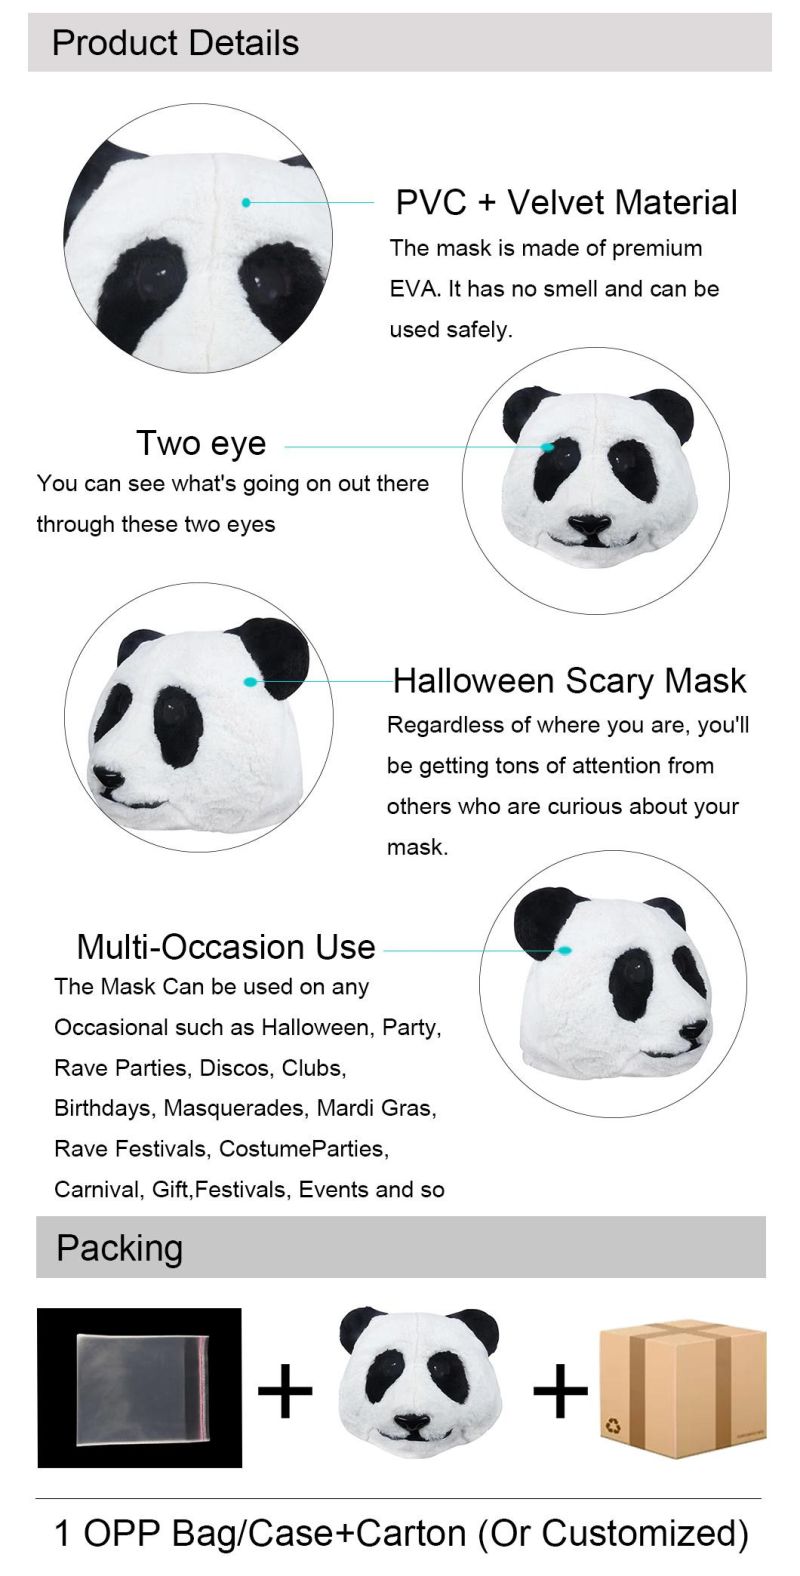 Animal Face Mask Halloween Panda Full Head Party Masks for Costume Cosplay